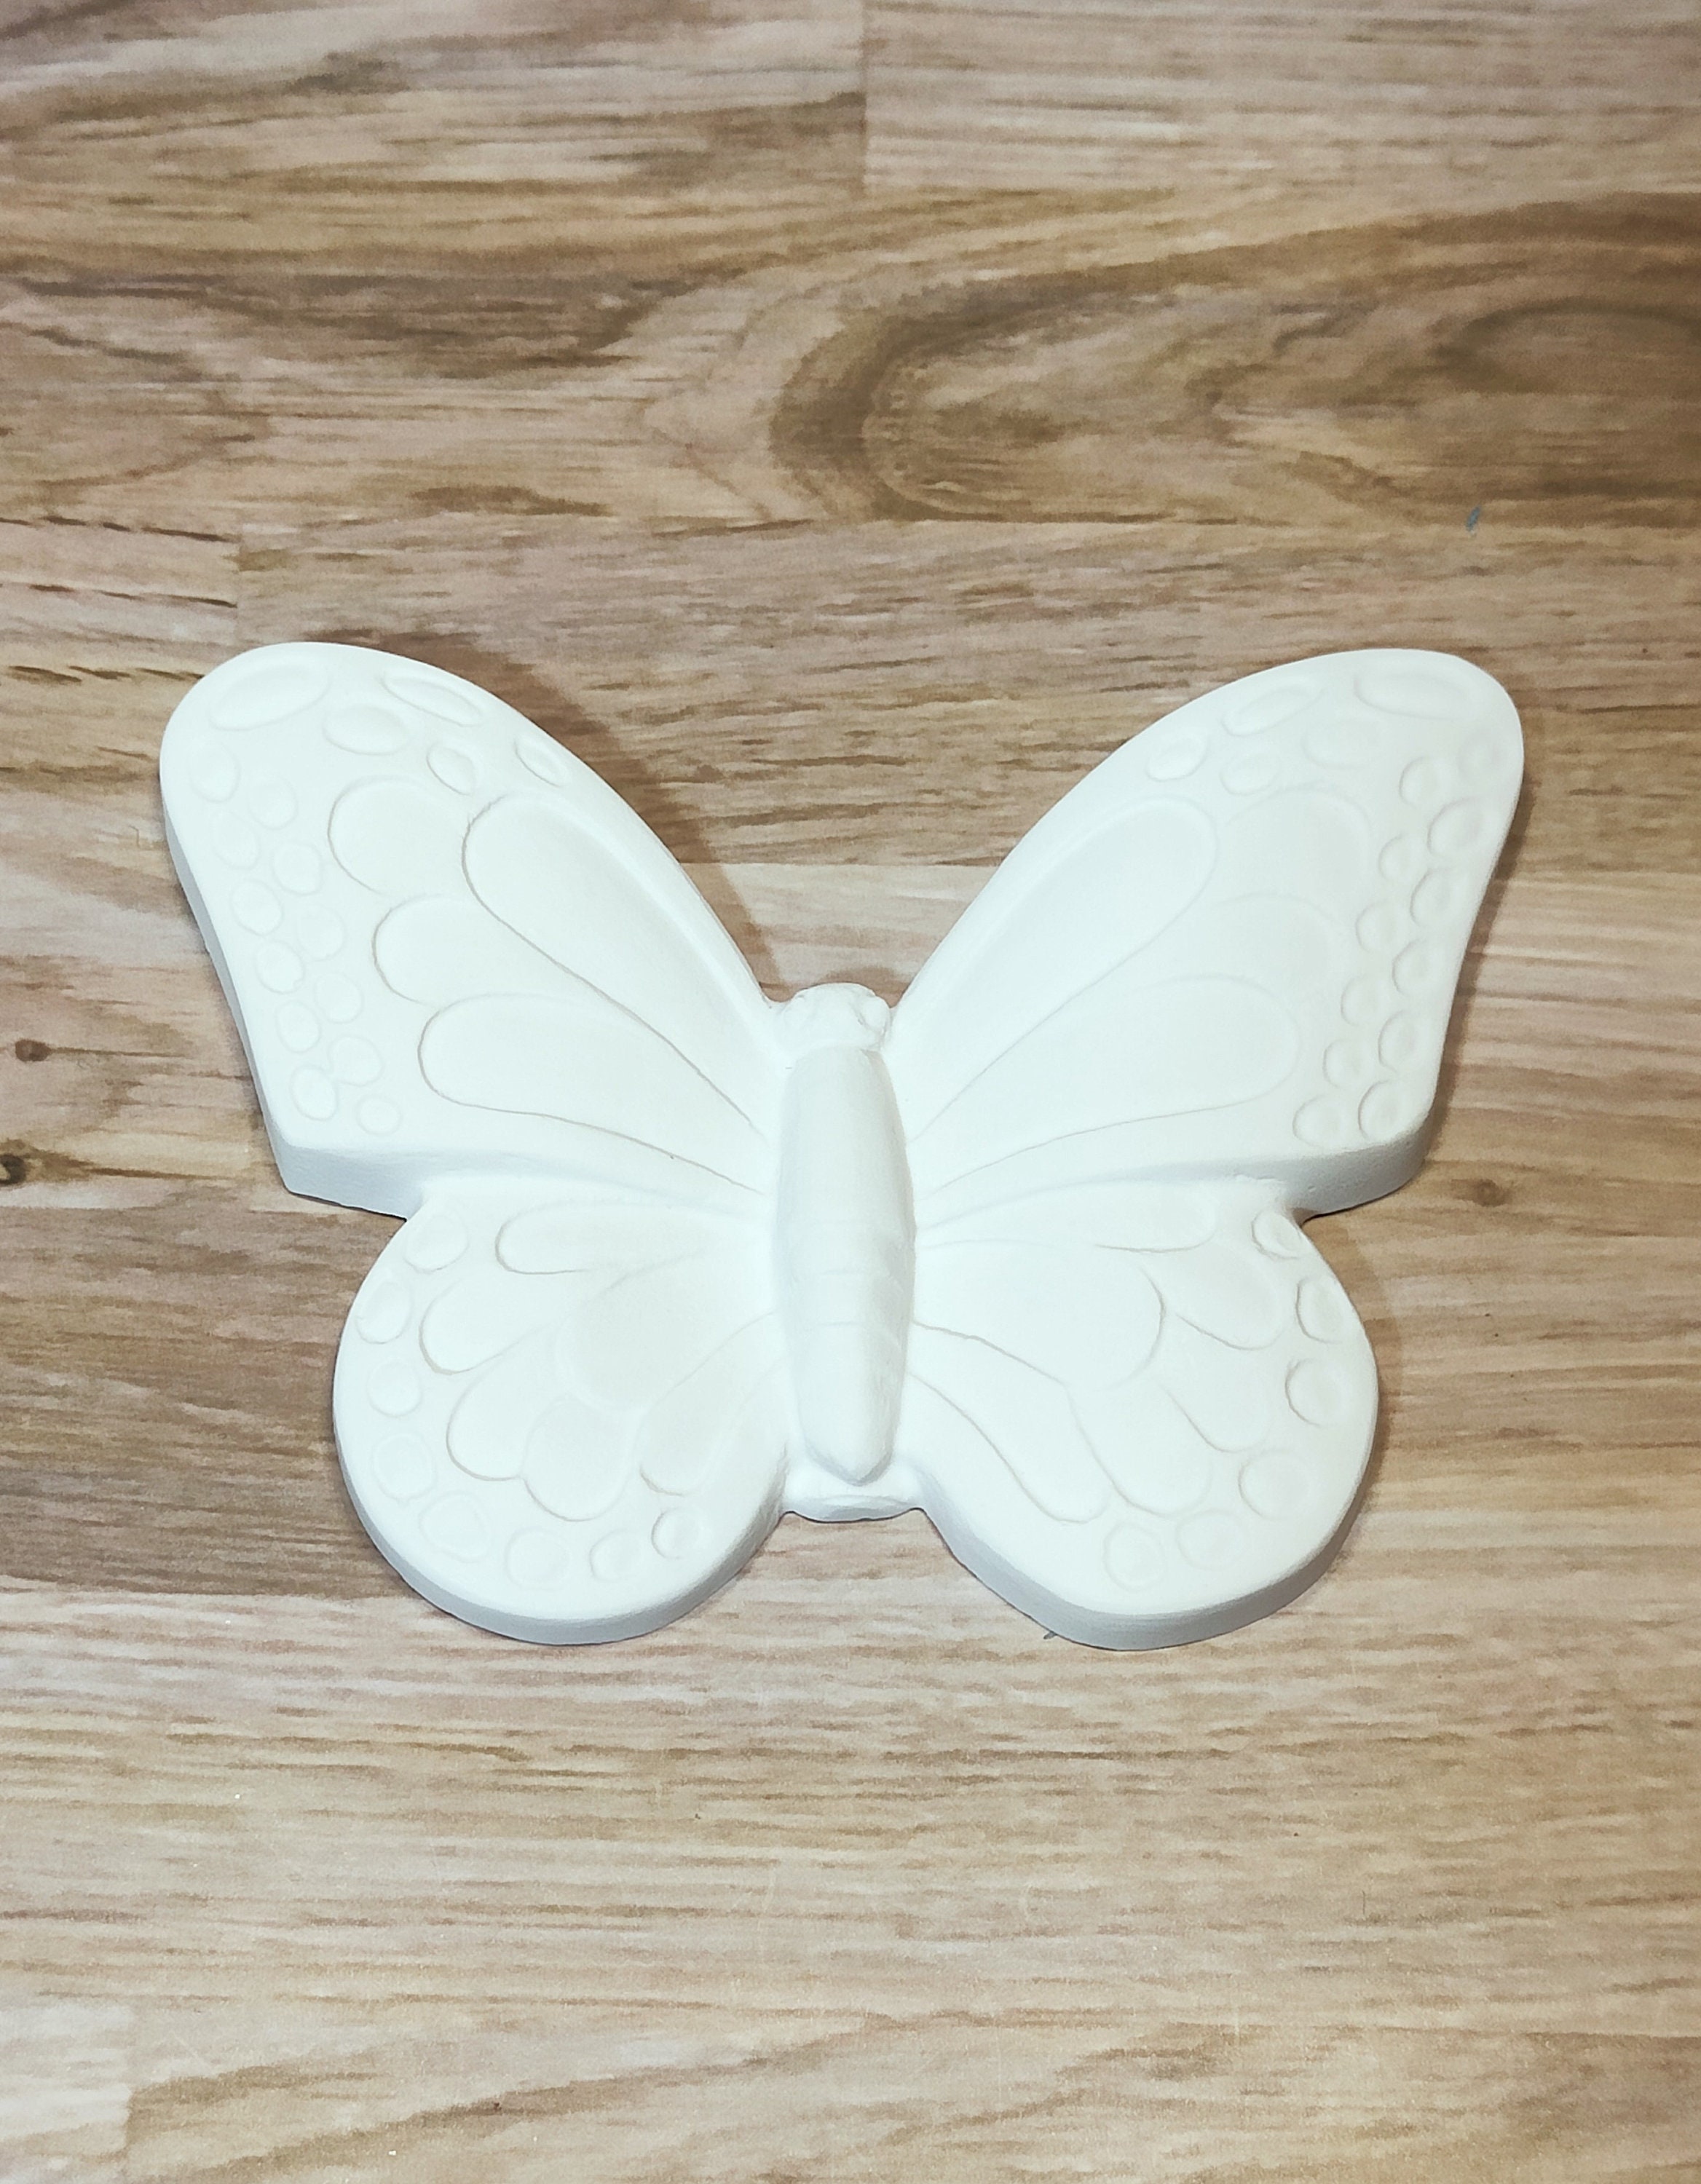 Butterfly Ladybug Flydragon Bee Silicone Mold Liquid Clay Craft Concrete  Molds for Plaster Designer DIY 3D Wall Panel